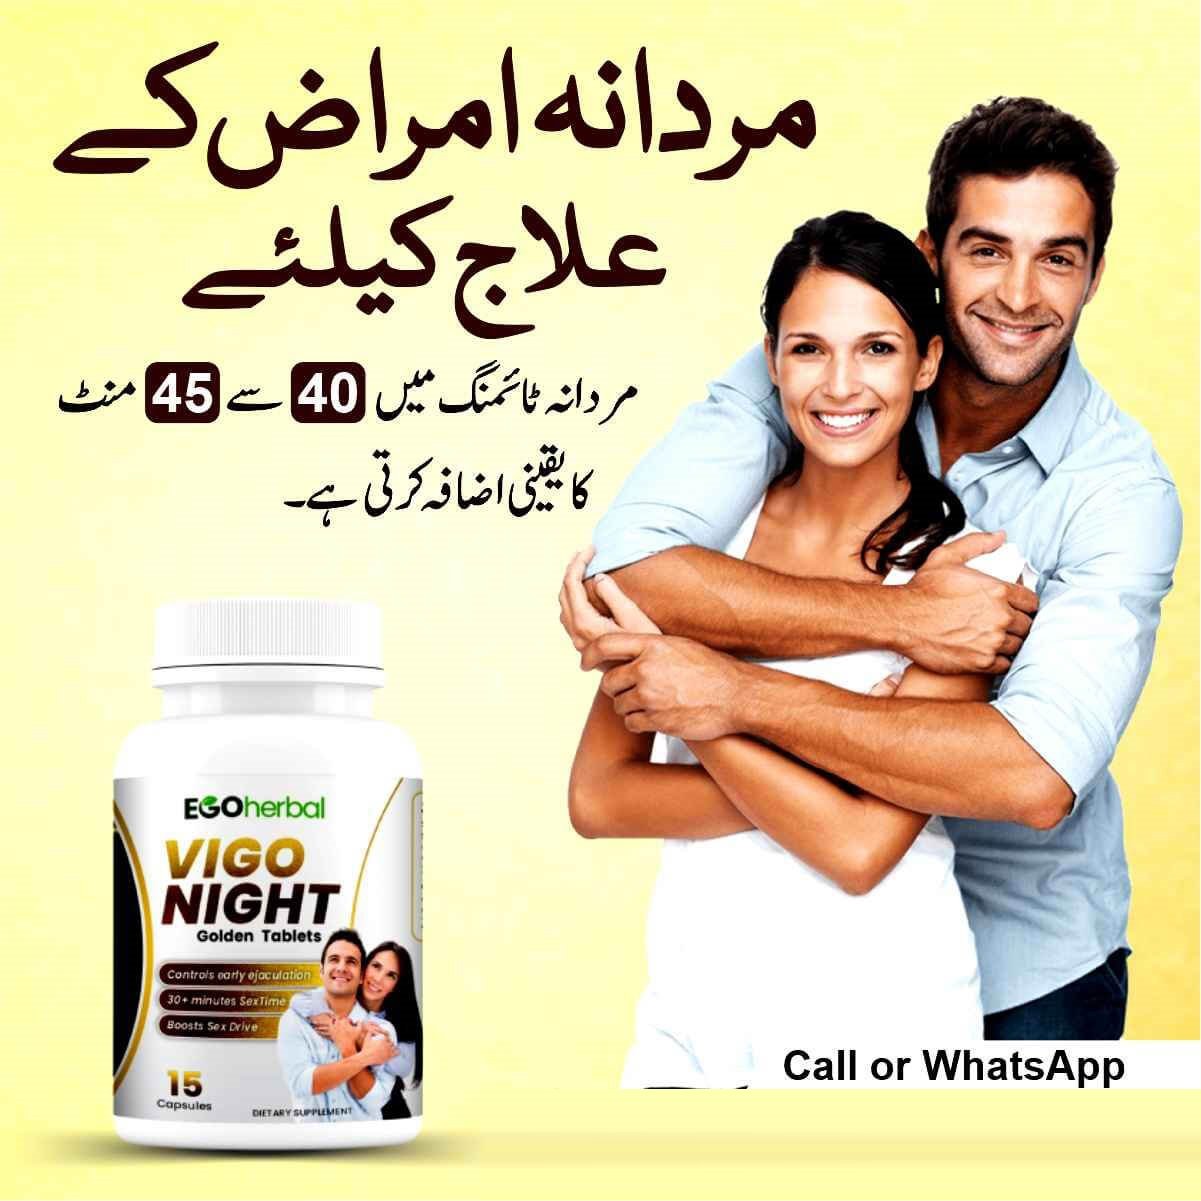 Buy Vigonight Golden Capsule Price In Pakistan at Rs. 2500 from Likeshop.pk